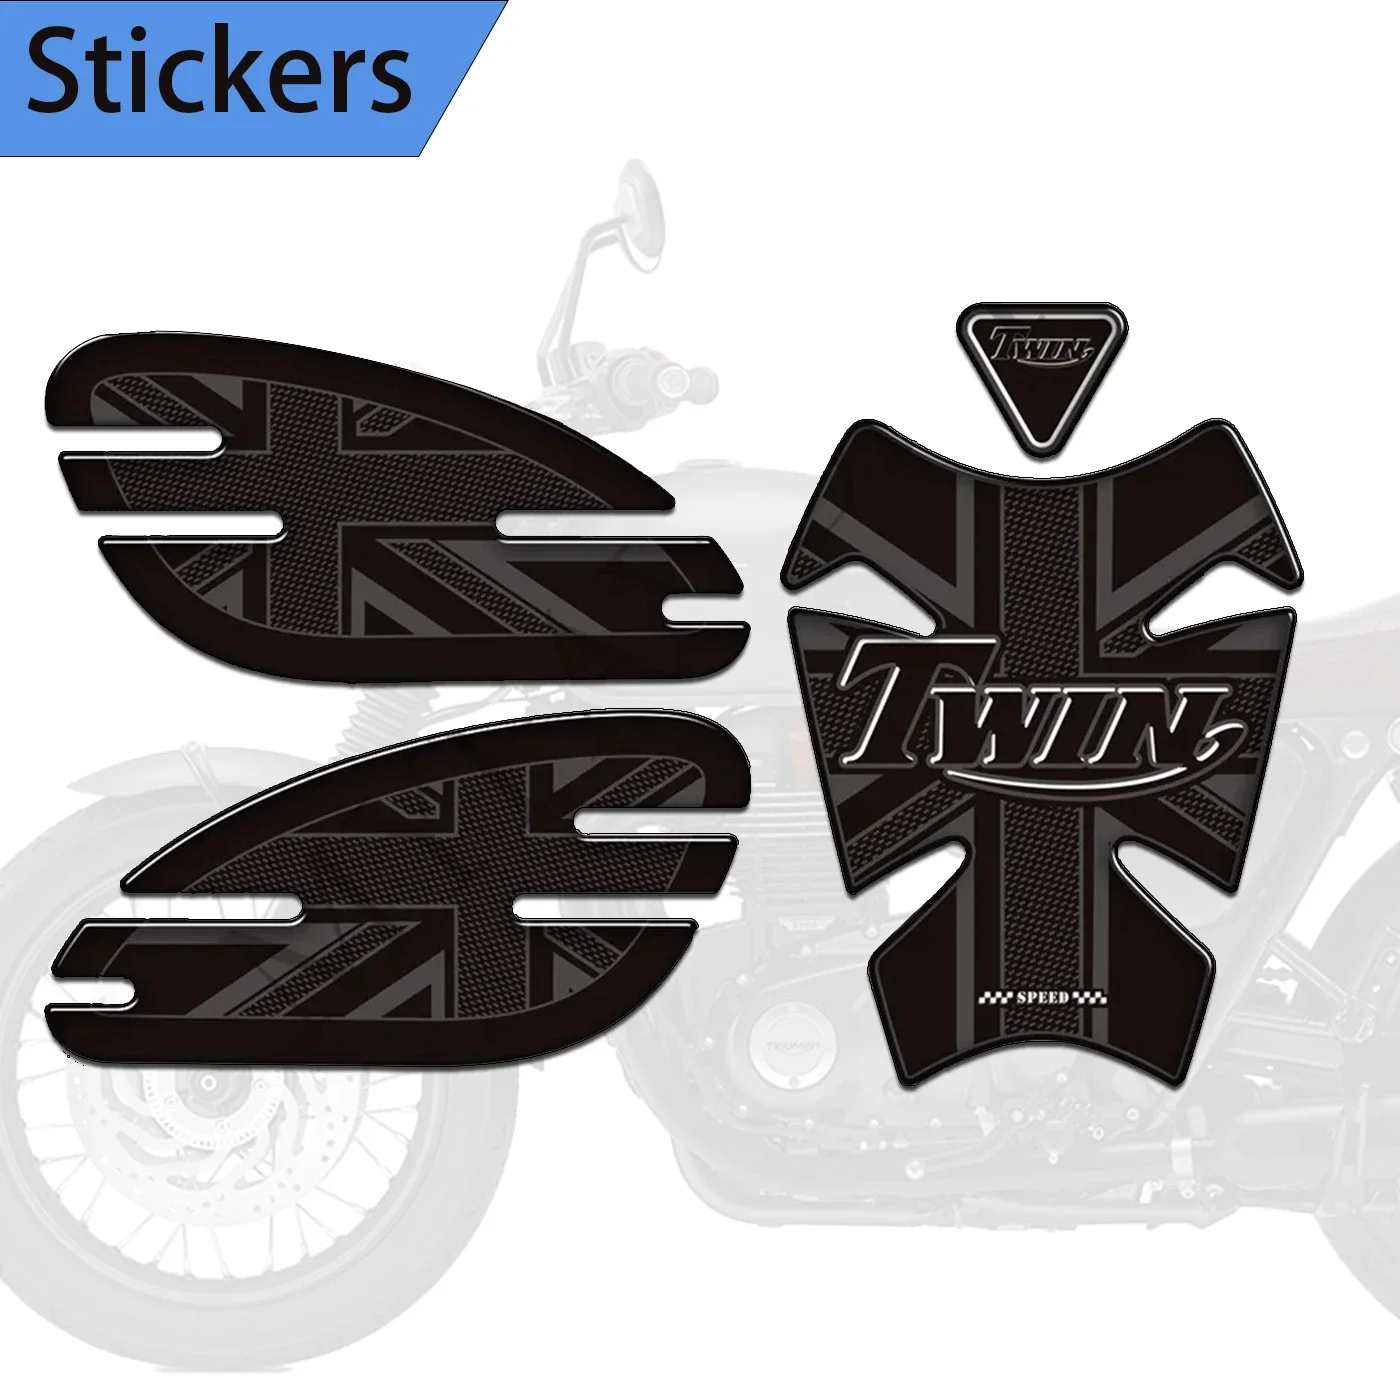 Speed Twin 900 For Triumph Speedmaster T100 T120 Street Cup Bobber MTE080 Bonneville Scrambler 1200 Thruxton R RS Decals fuel tank stickers anti slip sticker protector for triumph bobber t120 t100 motorcycle pvc rubber black